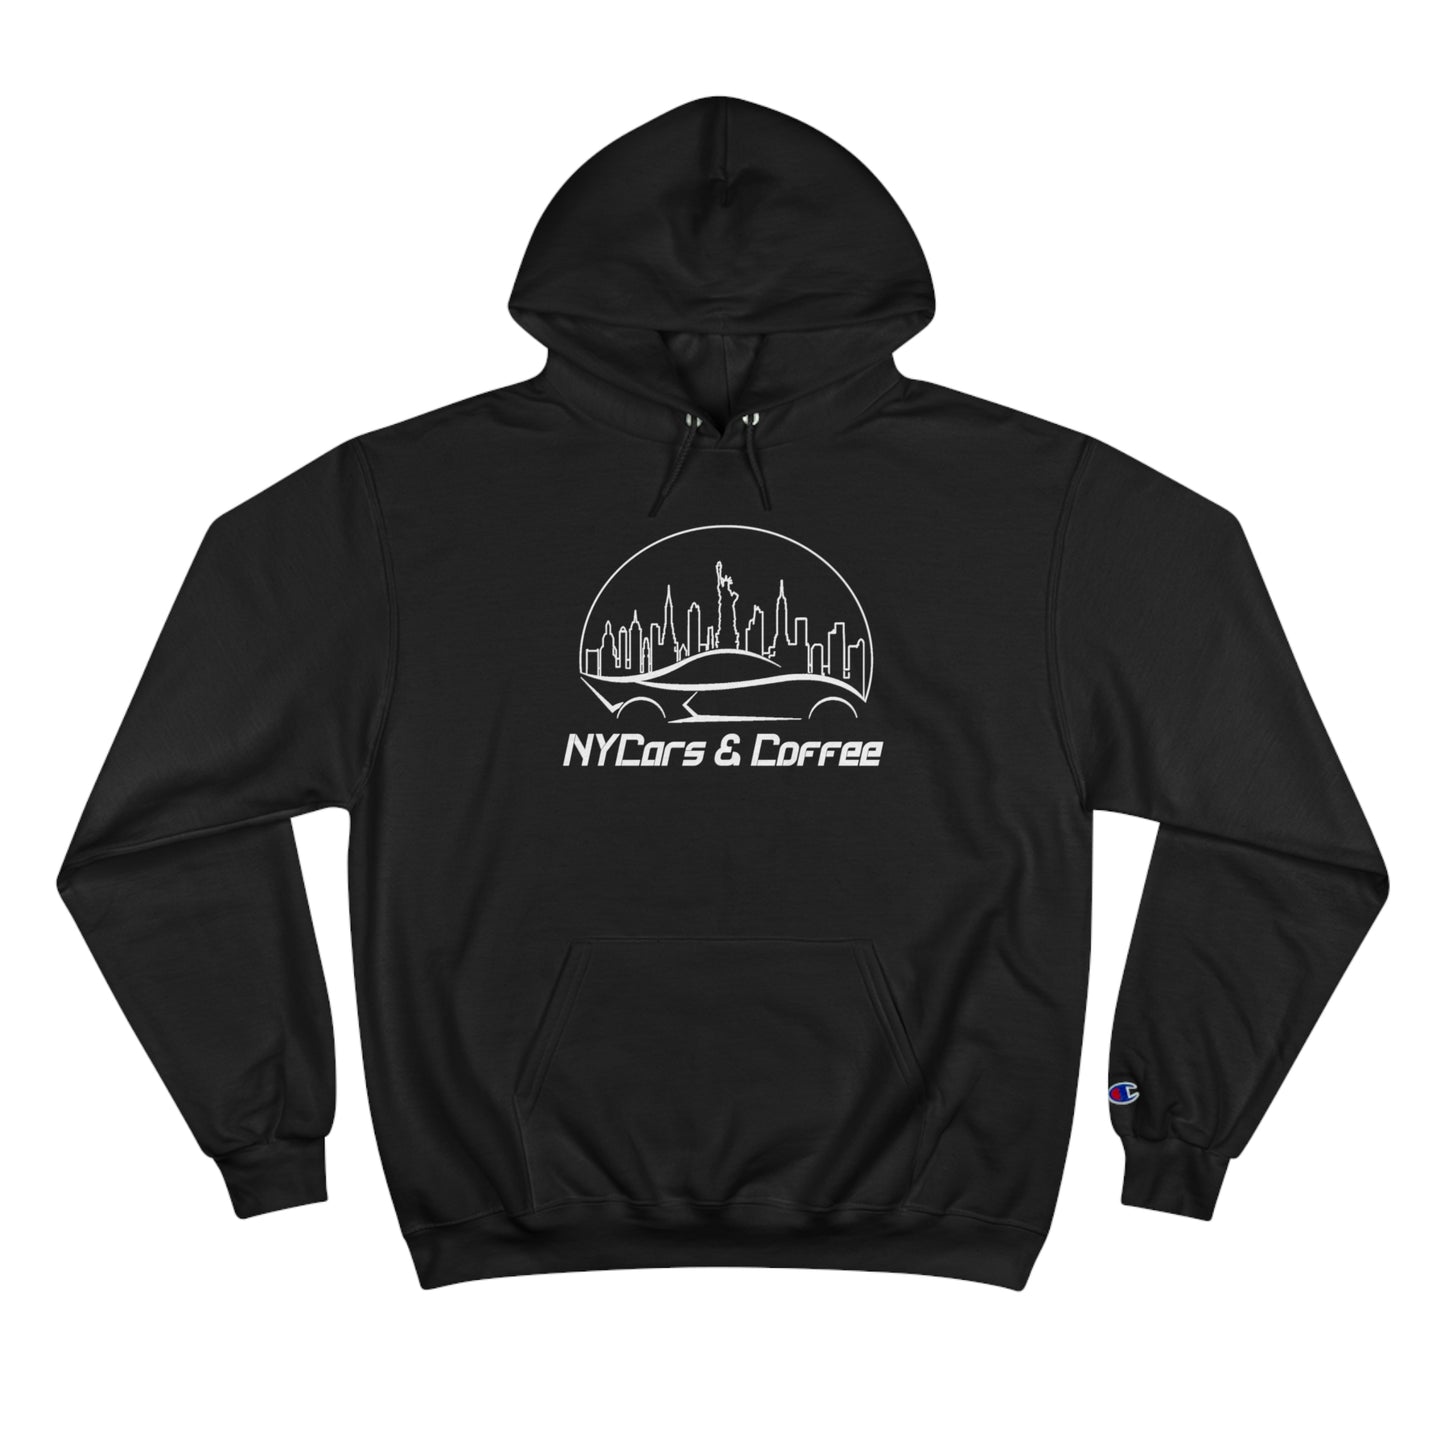 NYCars & Coffee "Legalize Car Meets" Champion Hoodie